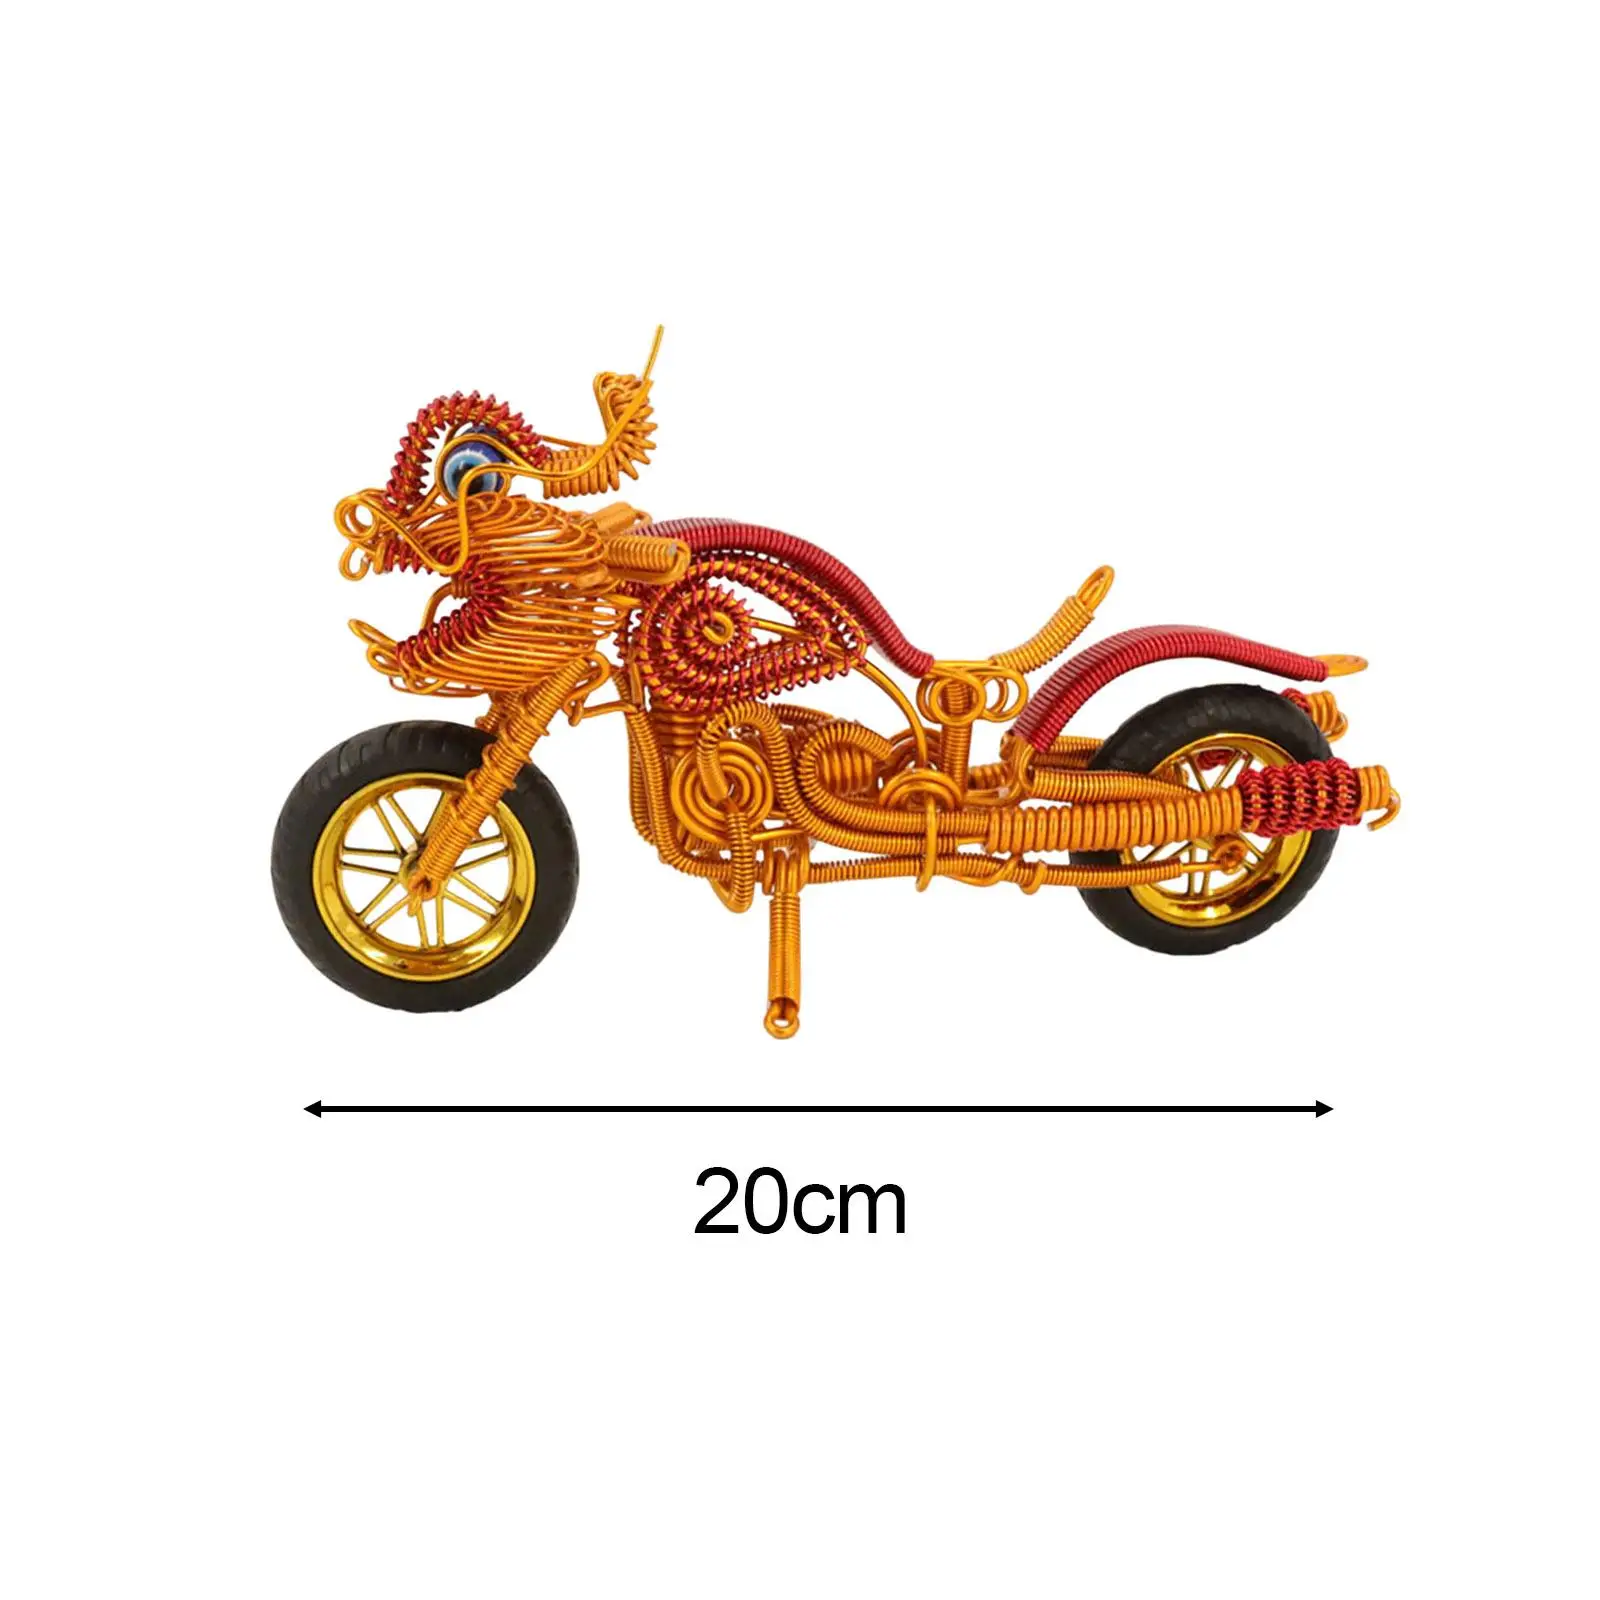 Motorcycle Model Metal Bookshelf Decor Crafts Aluminum Wire Figure Antique Novelty Ornaments Toy Collectible Boyfriend Gift